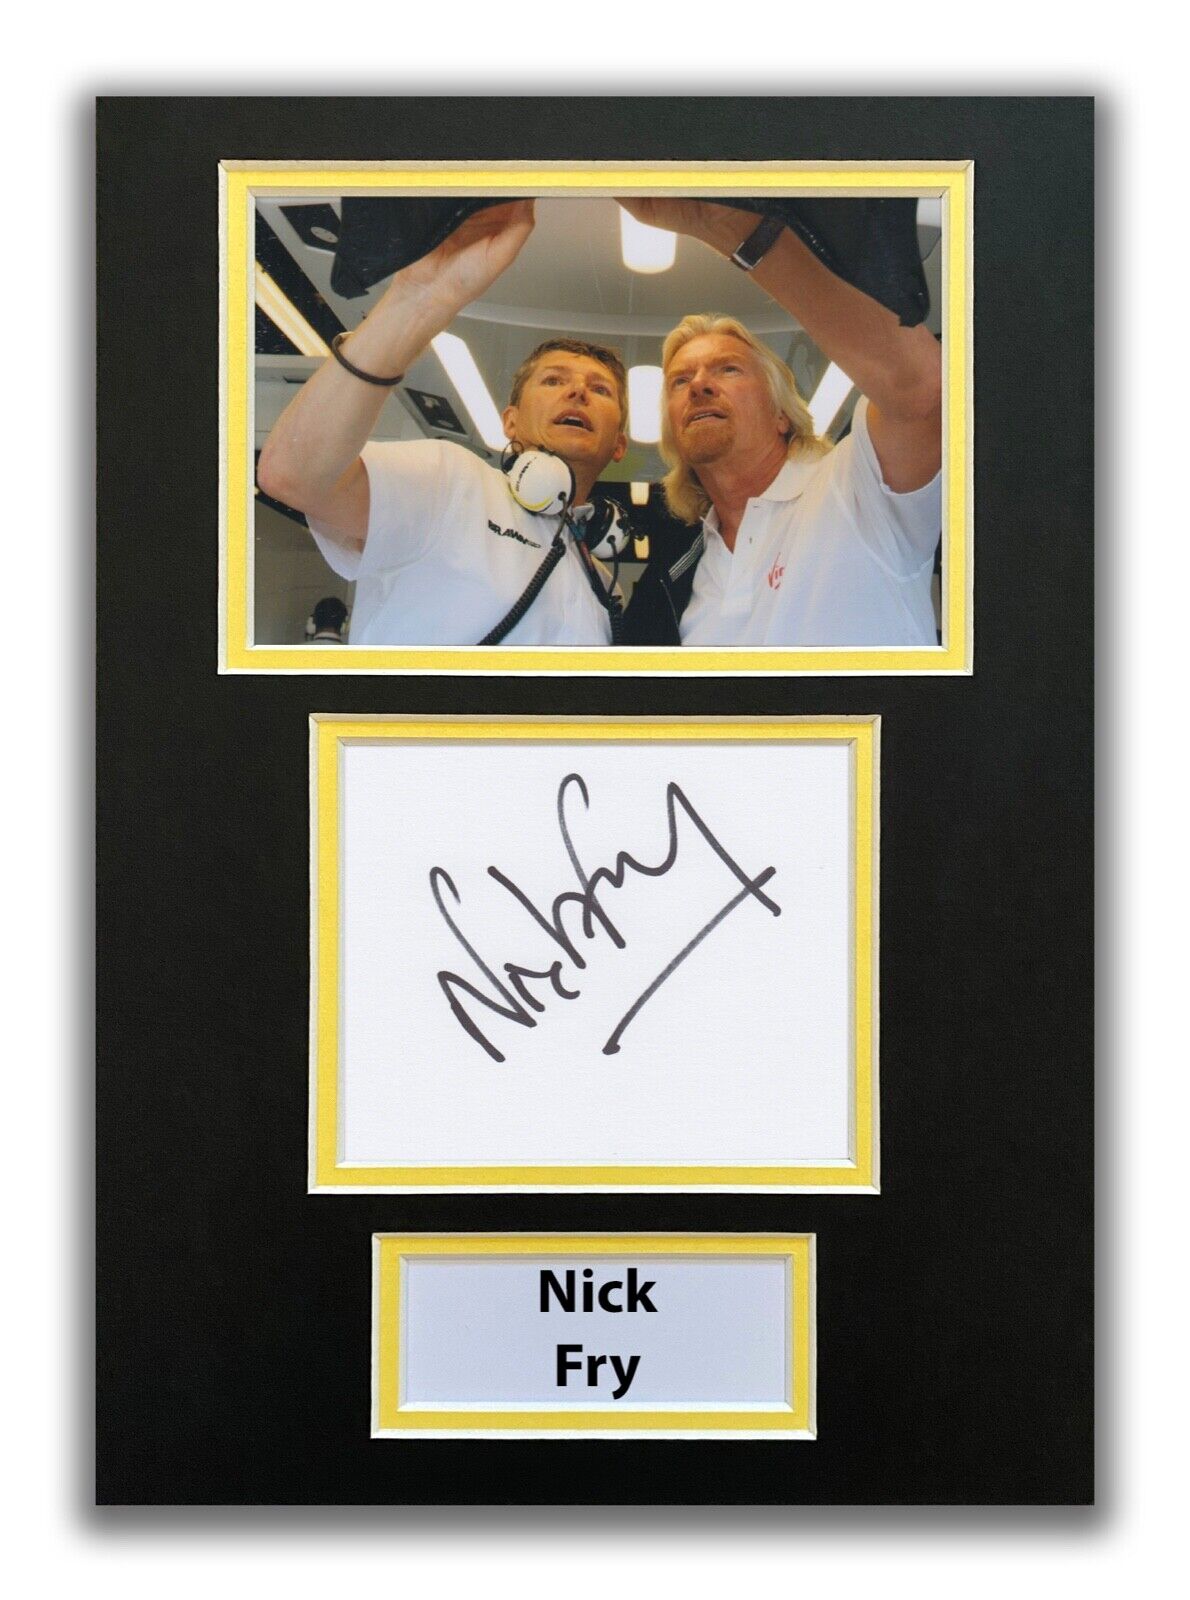 NICK FRY HAND SIGNED A4 MOUNTED Photo Poster painting DISPLAY - BRAWN - F1 AUTOGRAPH 1.